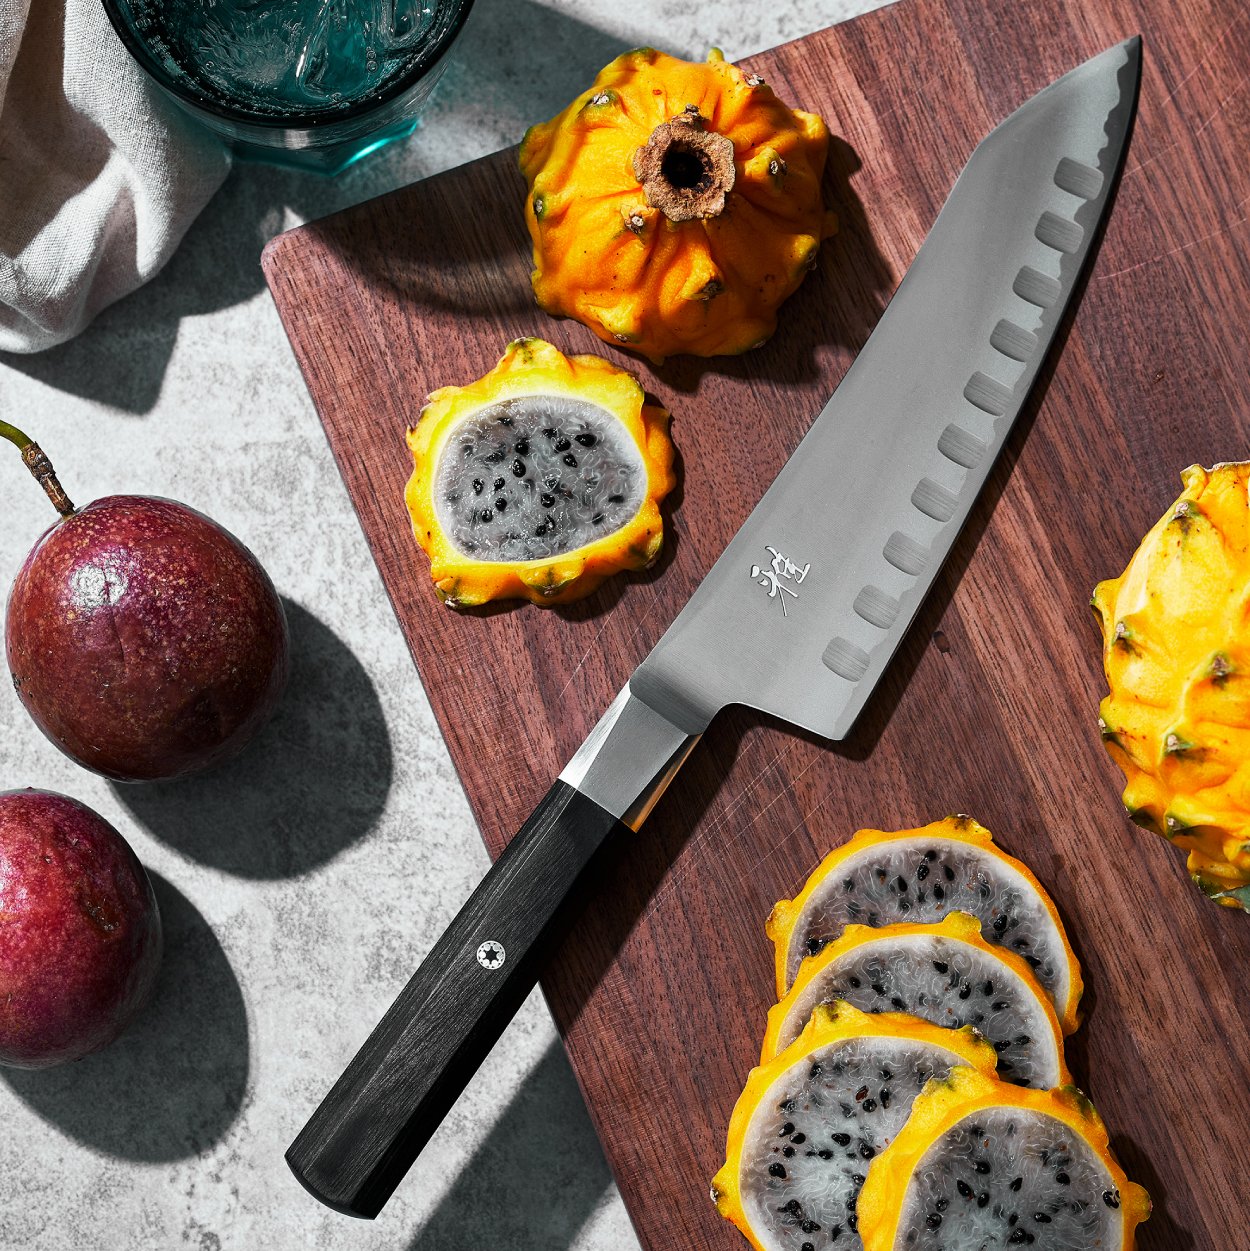 https://www.zwilling.com/on/demandware.static/-/Sites-zwilling-us-Library/default/dw97fc3207/images/product-content/product-specific-images/knife-sharpengin-masonry/knife_sharpening_Masonry_600x600_2.jpg